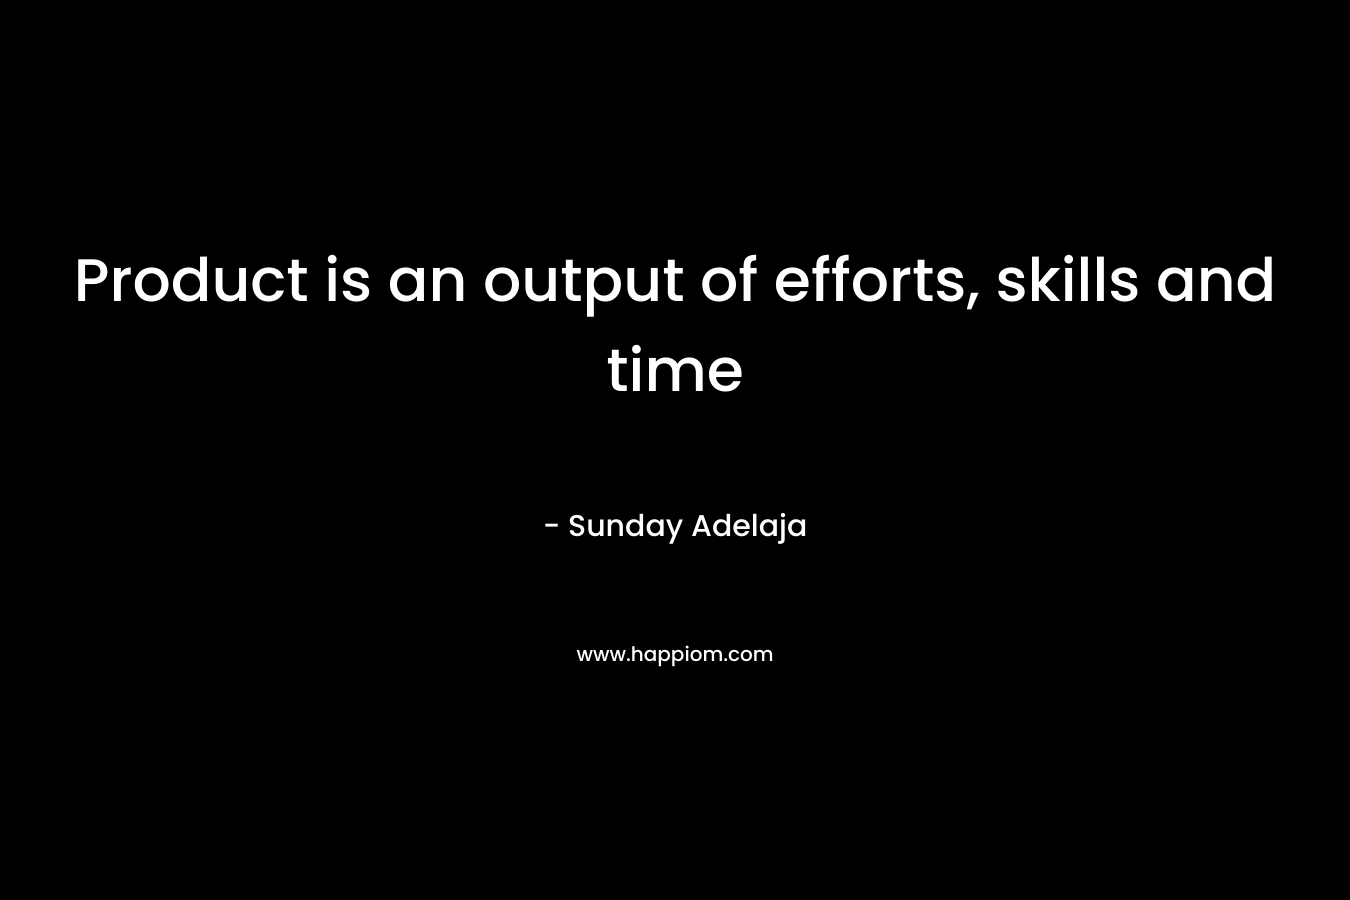 Product is an output of efforts, skills and time